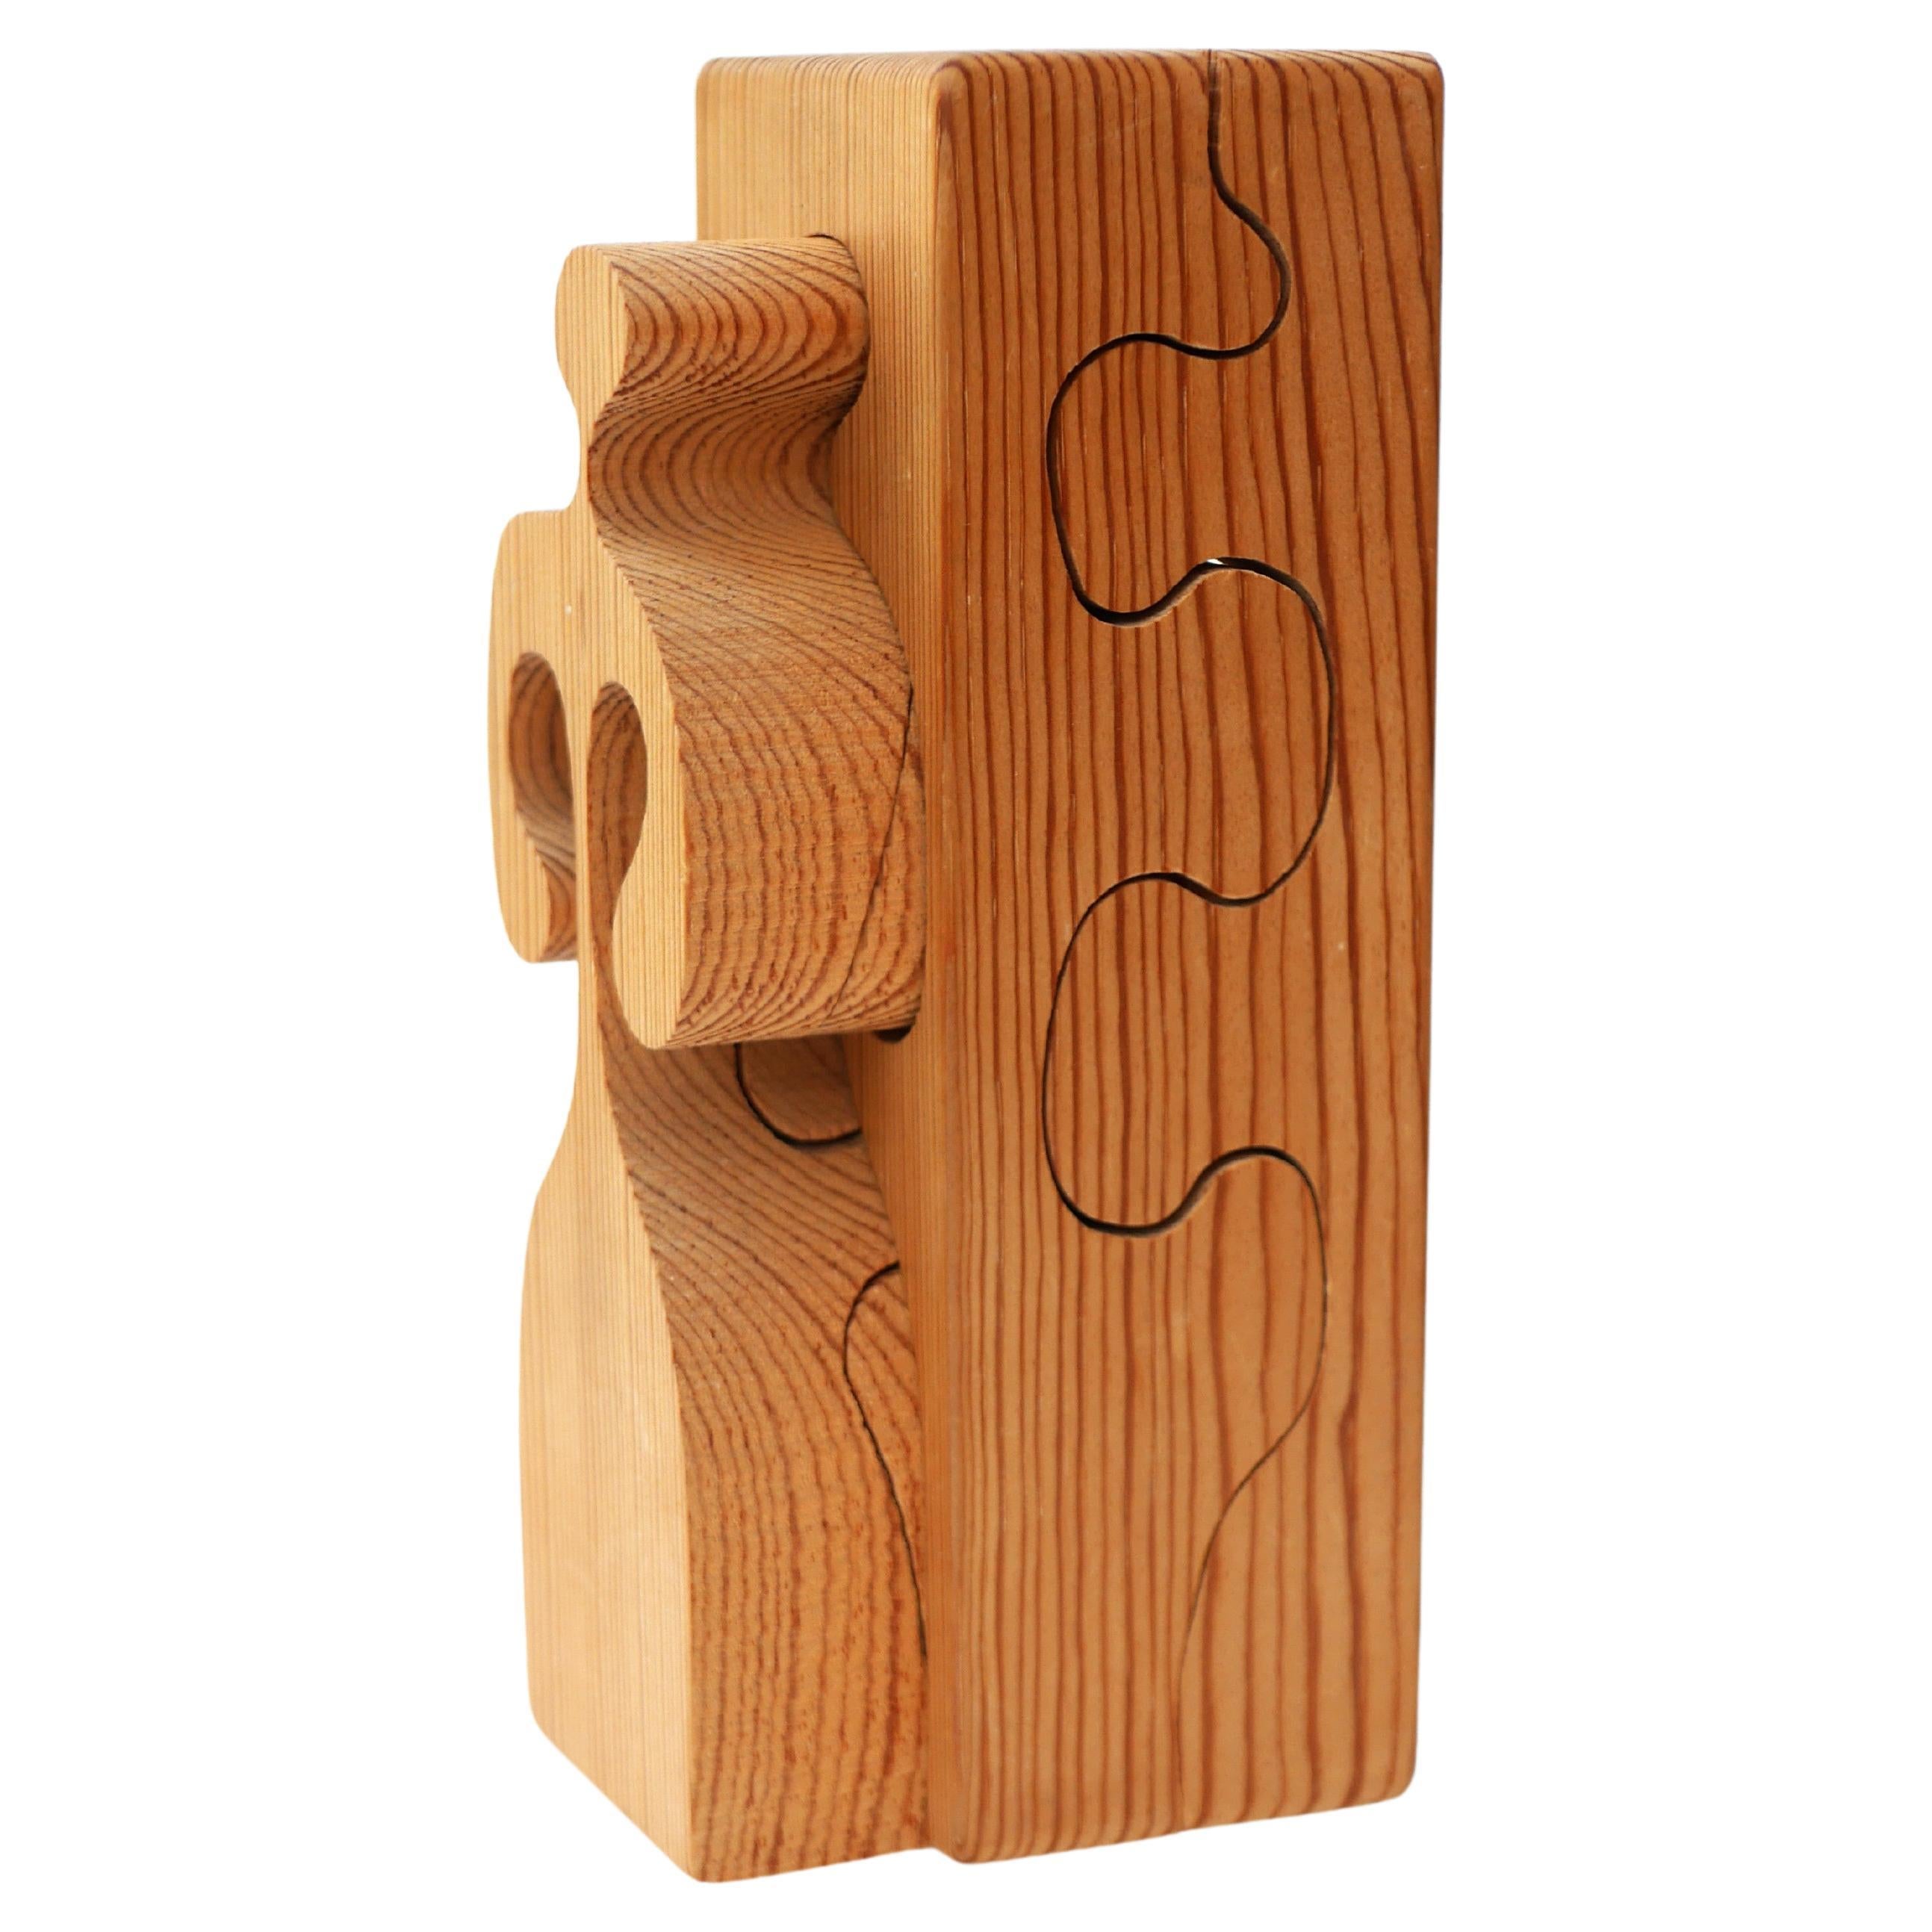 Wooden Puzzle Sculpture by Gunnar Kanevad for Gamla Linköping Sweden, 1962 For Sale